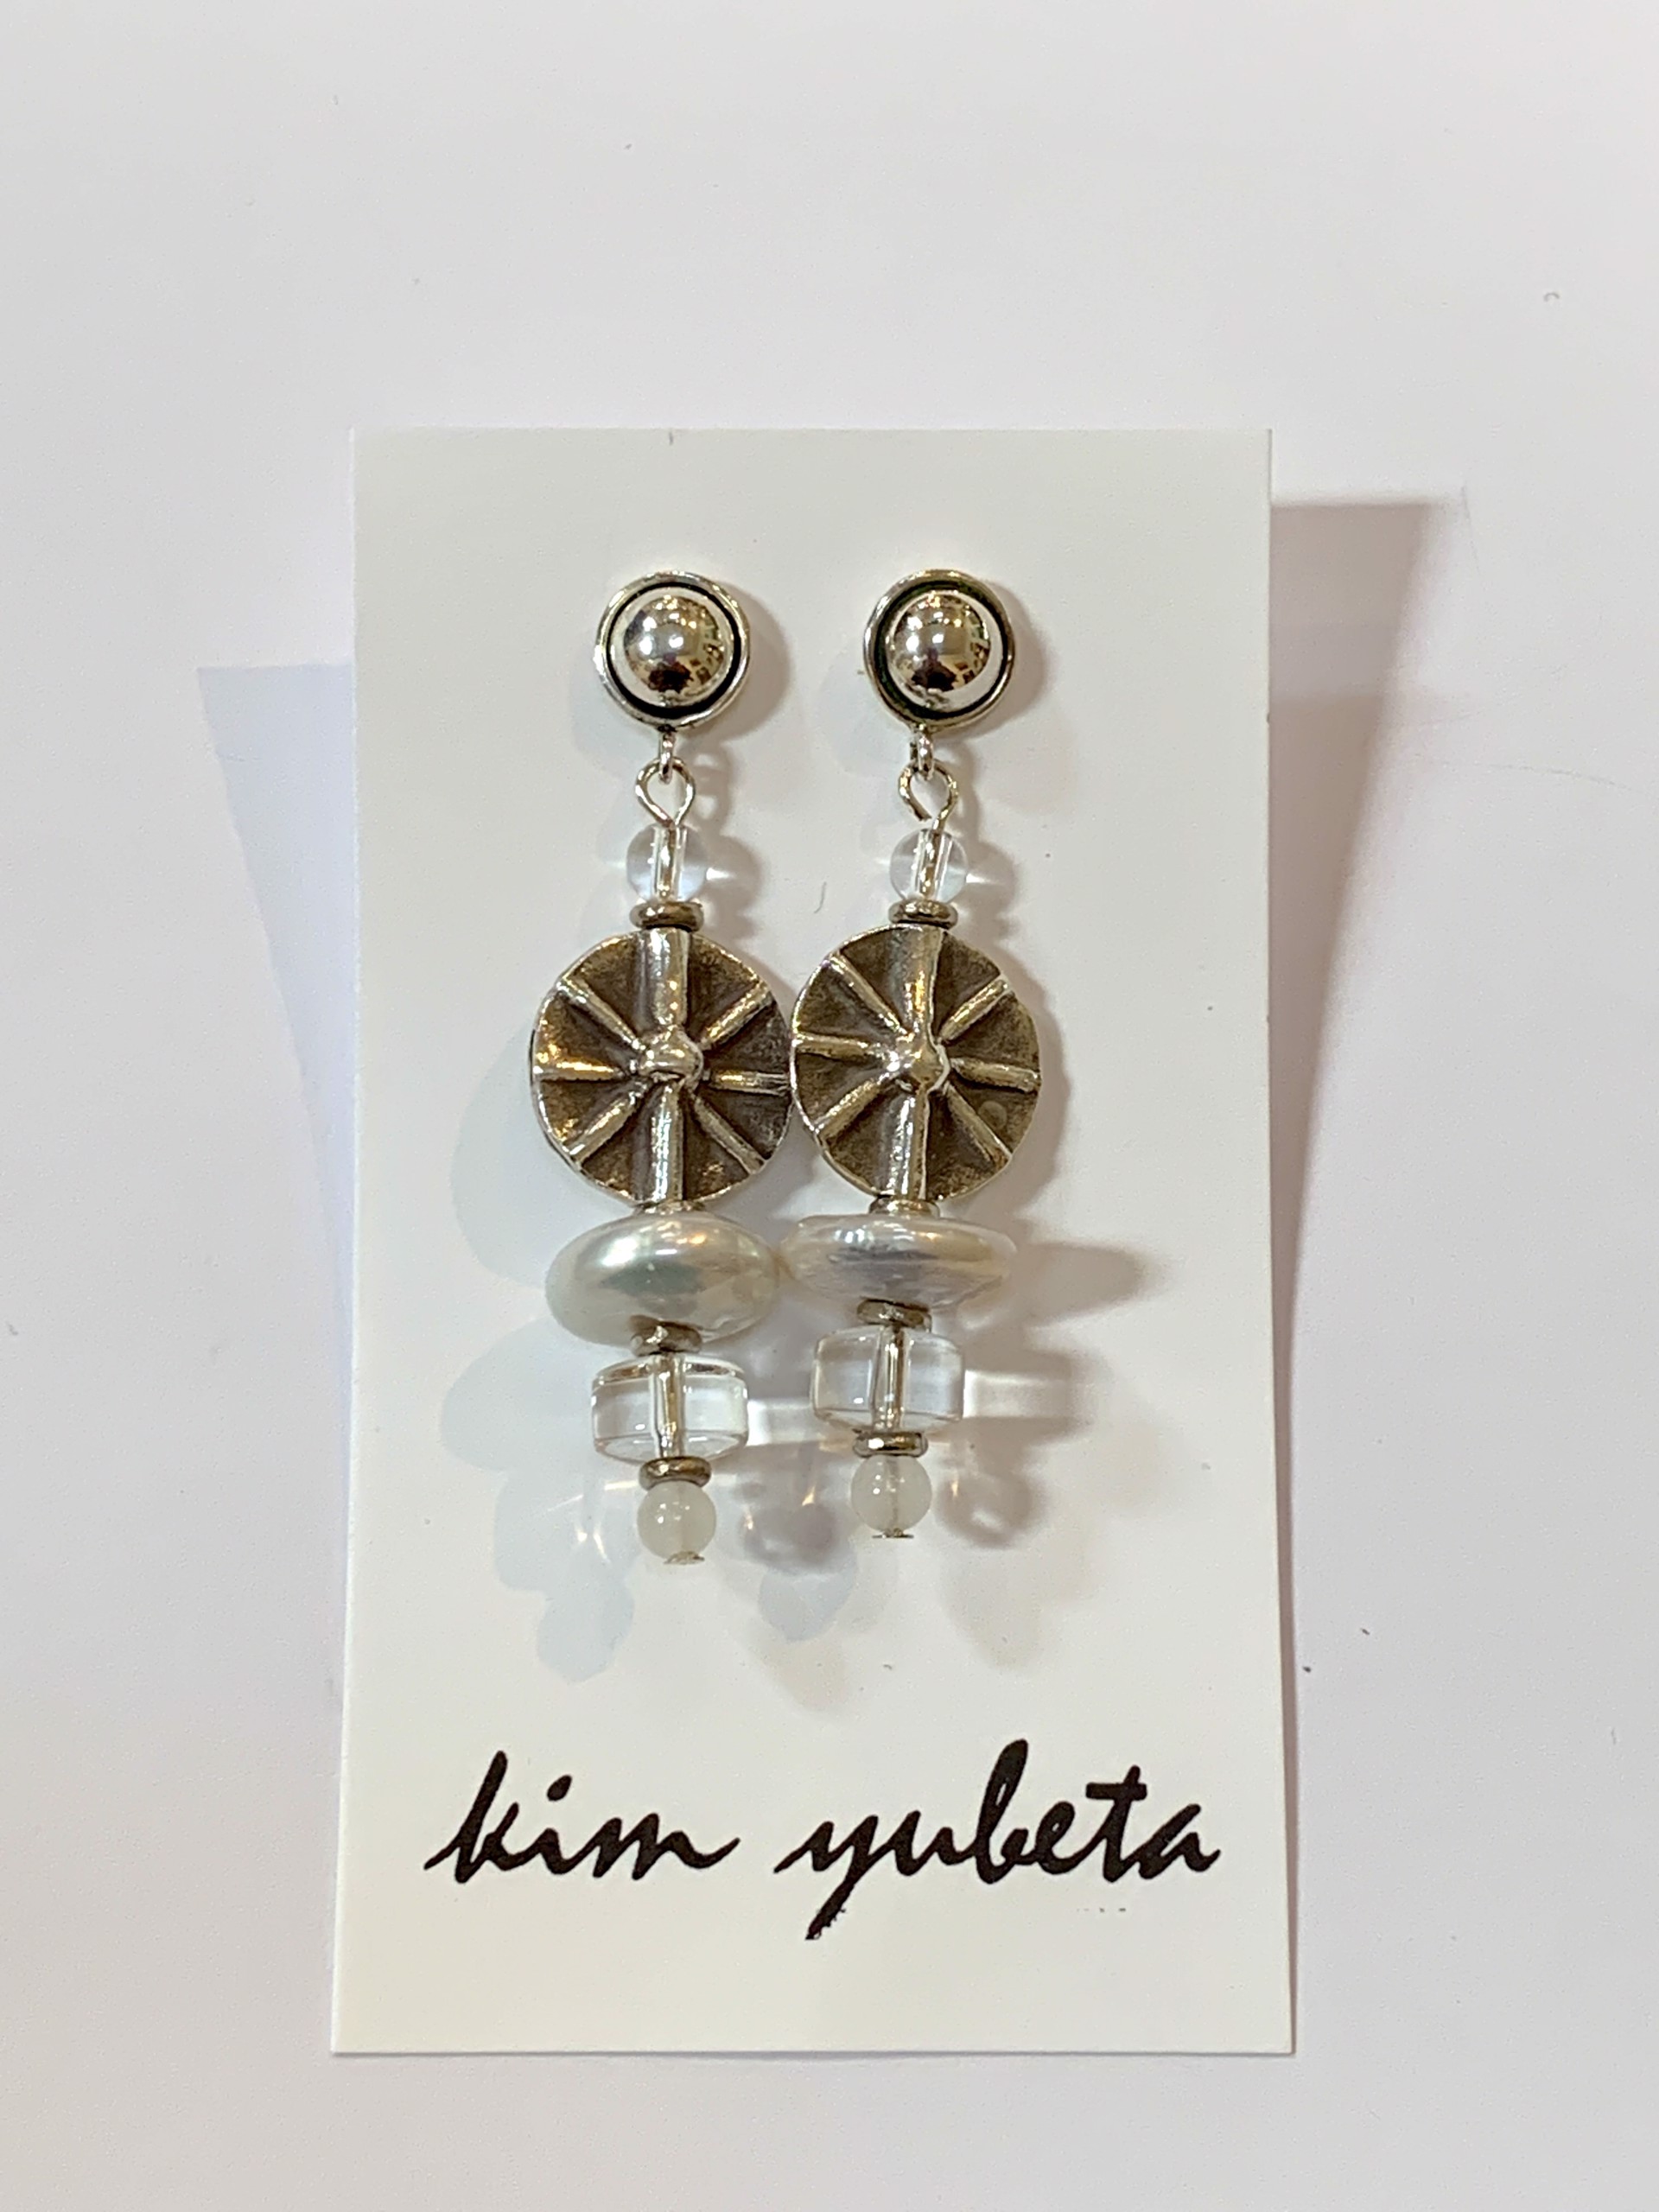 KY 1405 Rock Crystal and Pearl Earrings by Kim Yubeta